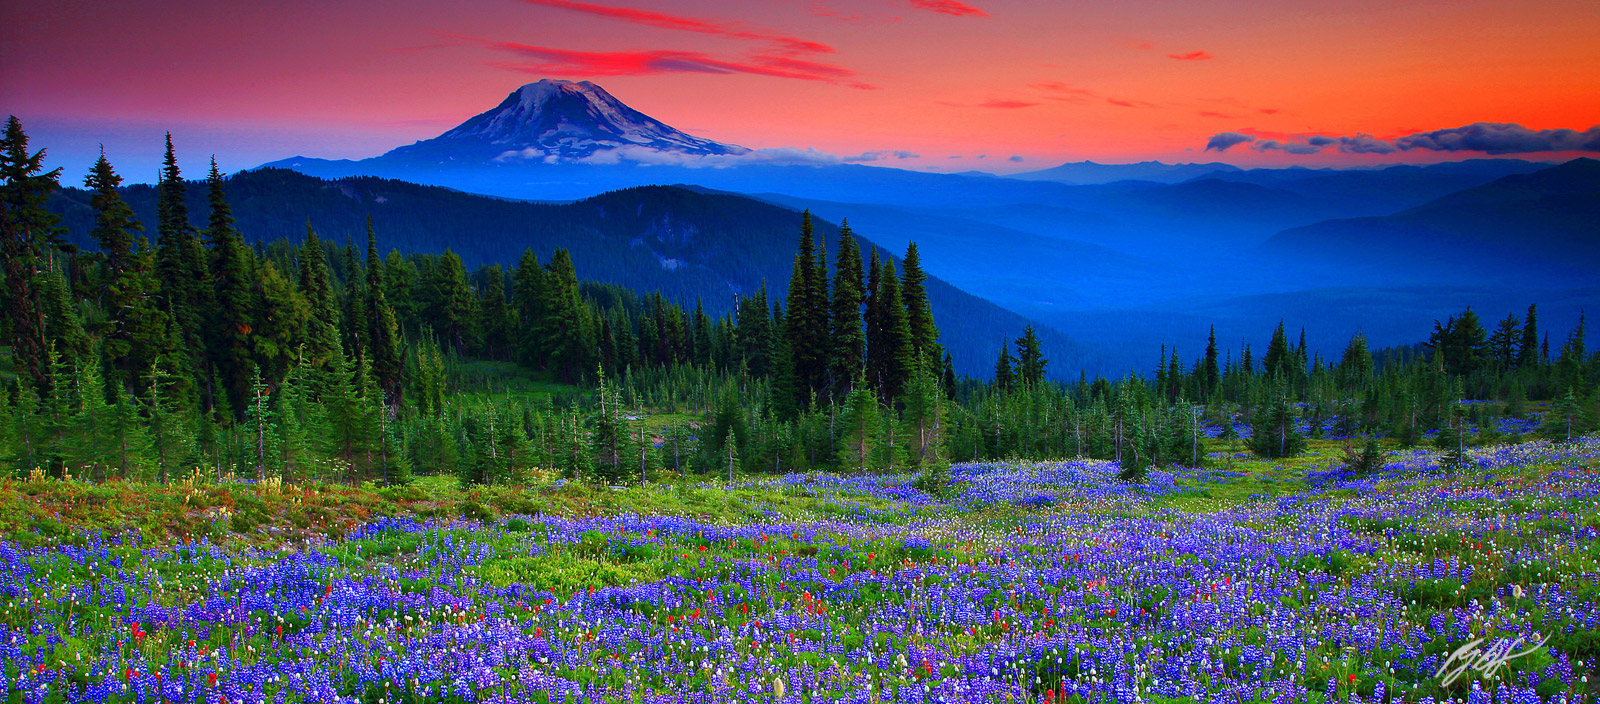 Sunset Wildflowers and Mt Adams from Snowgrass Flats in the Goat Rocks Wilderness in Washington